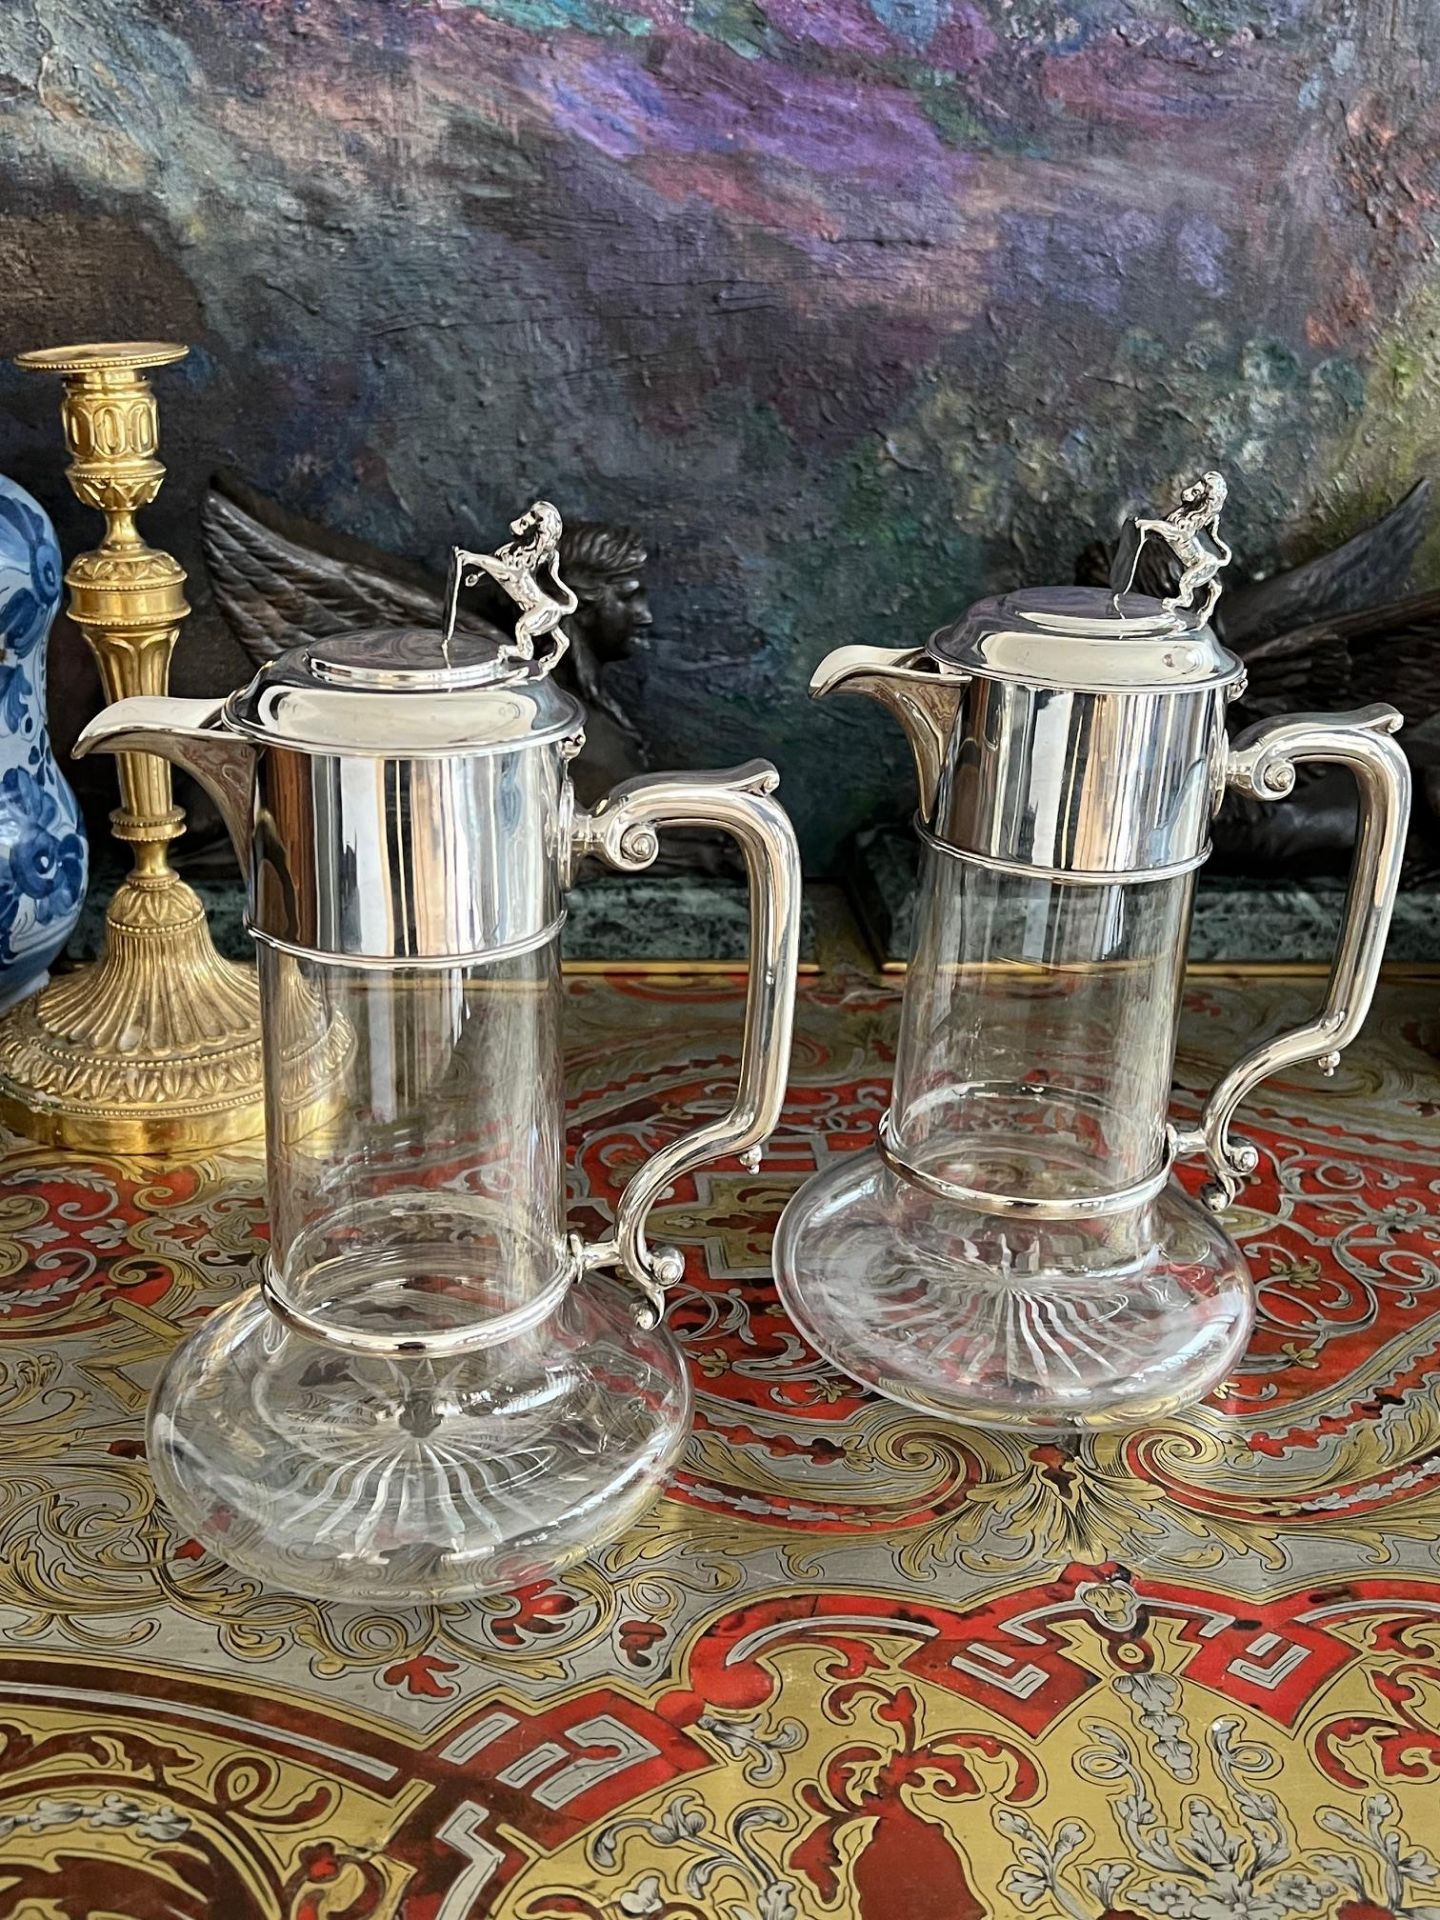 A PAIR OF 19TH CENTURY STERLING SILVER AND GLASS CLARET JUGS SURMOUNTED BY LIONS - Image 2 of 6